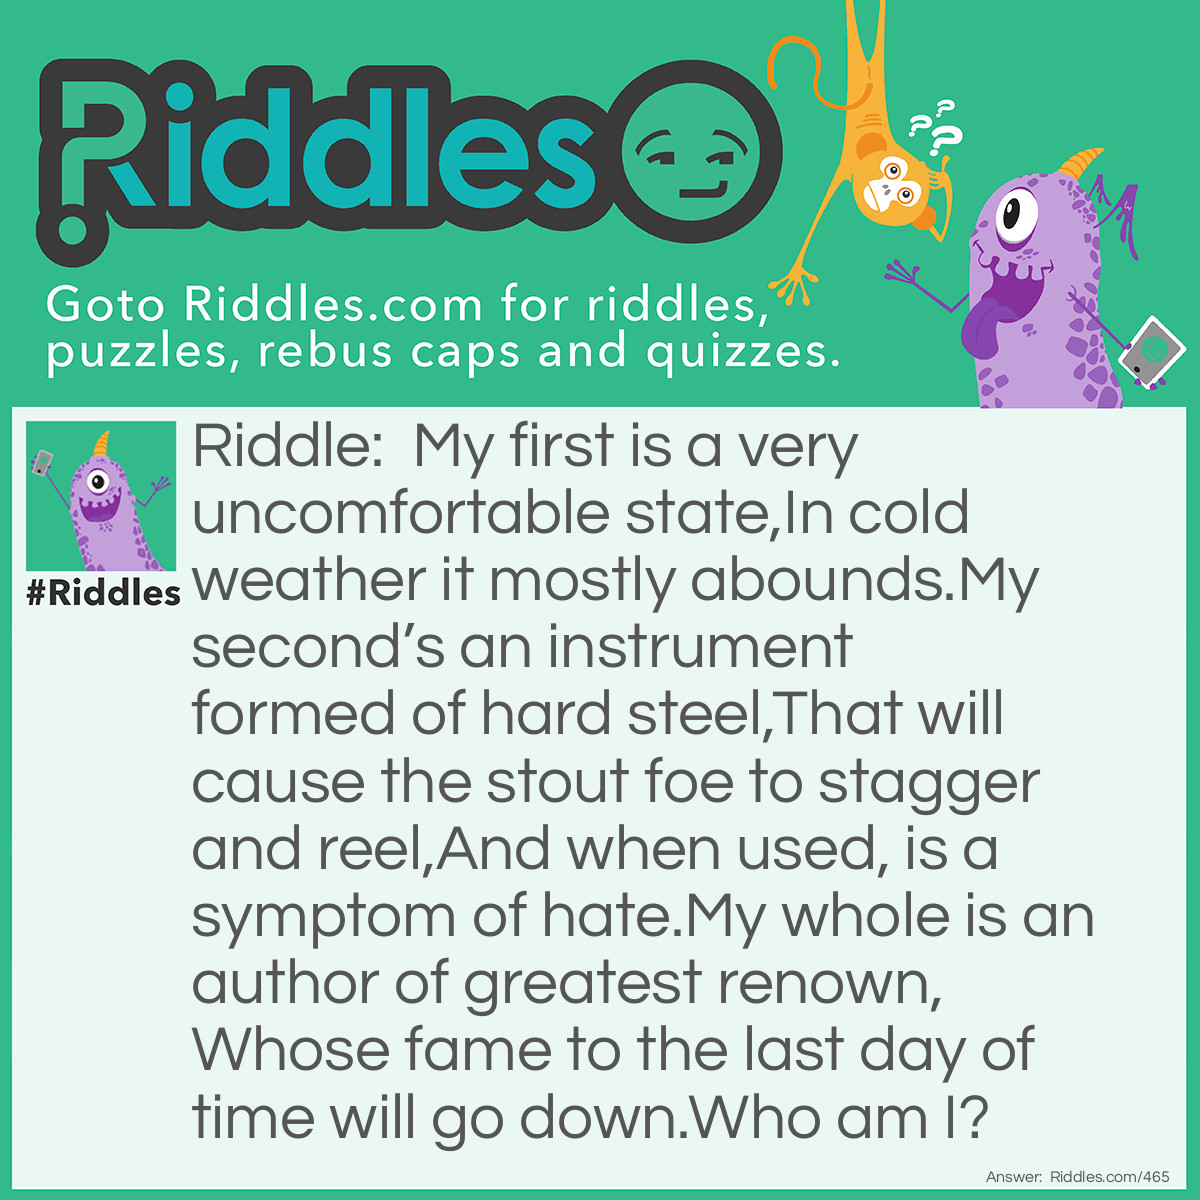 Riddle: My first is a very uncomfortable state,
In cold weather it mostly abounds.
My second's an instrument formed of hard steel,
That will cause the stout foe to stagger and reel,
And when used, is a symptom of hate.
My whole is an author of greatest renown,
Whose fame to the last day of time will go down.
Who am I? Answer: Shakespeare.